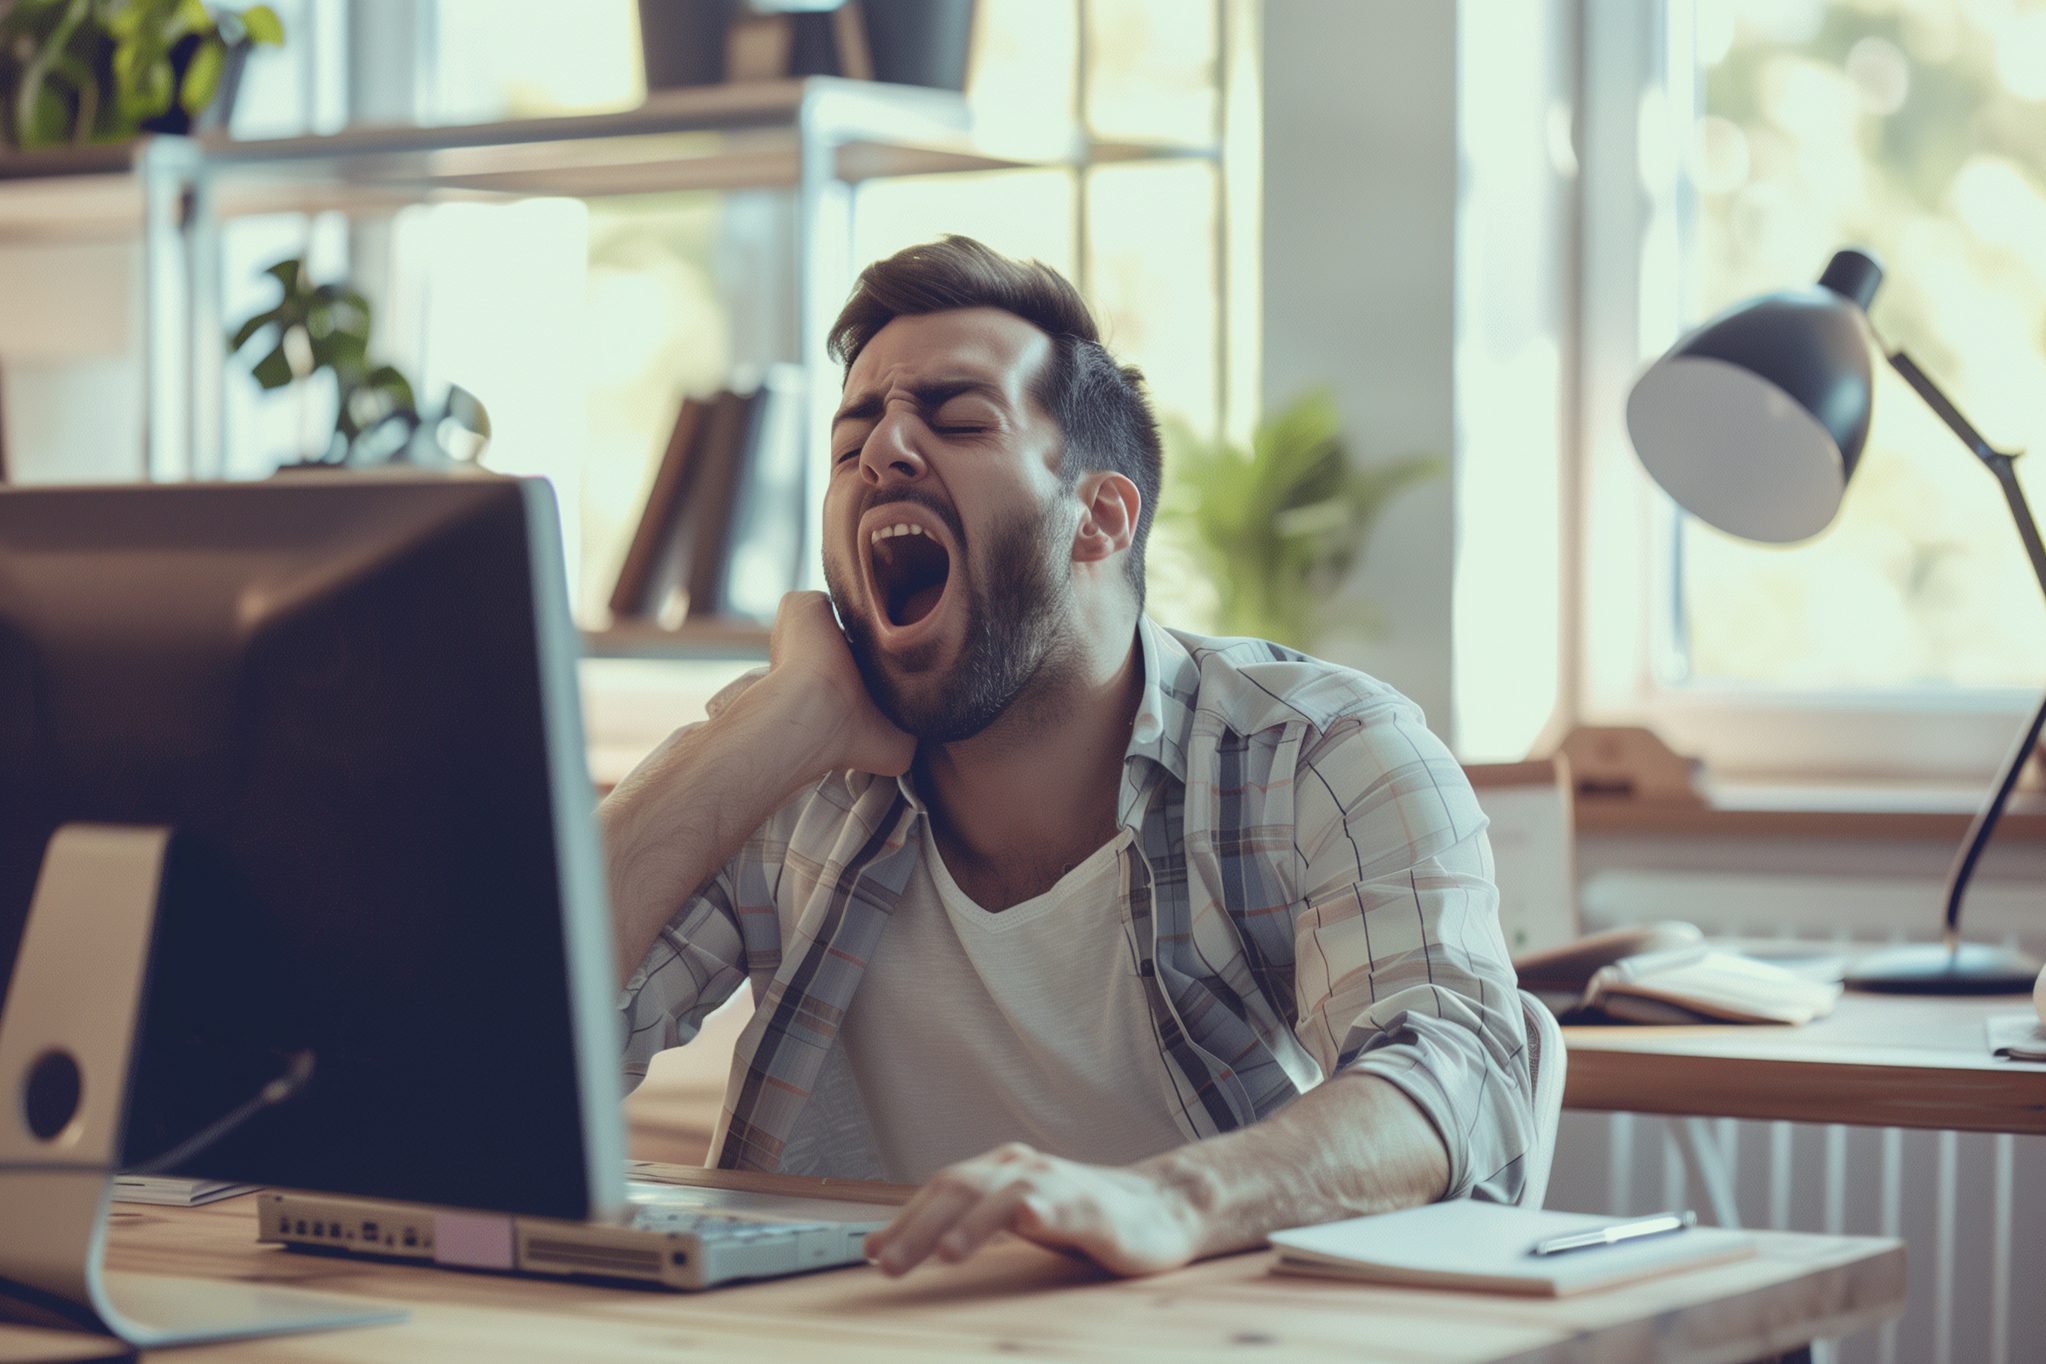 How to Stop Yawning So Much? Understanding and Managing Excessive Yawning